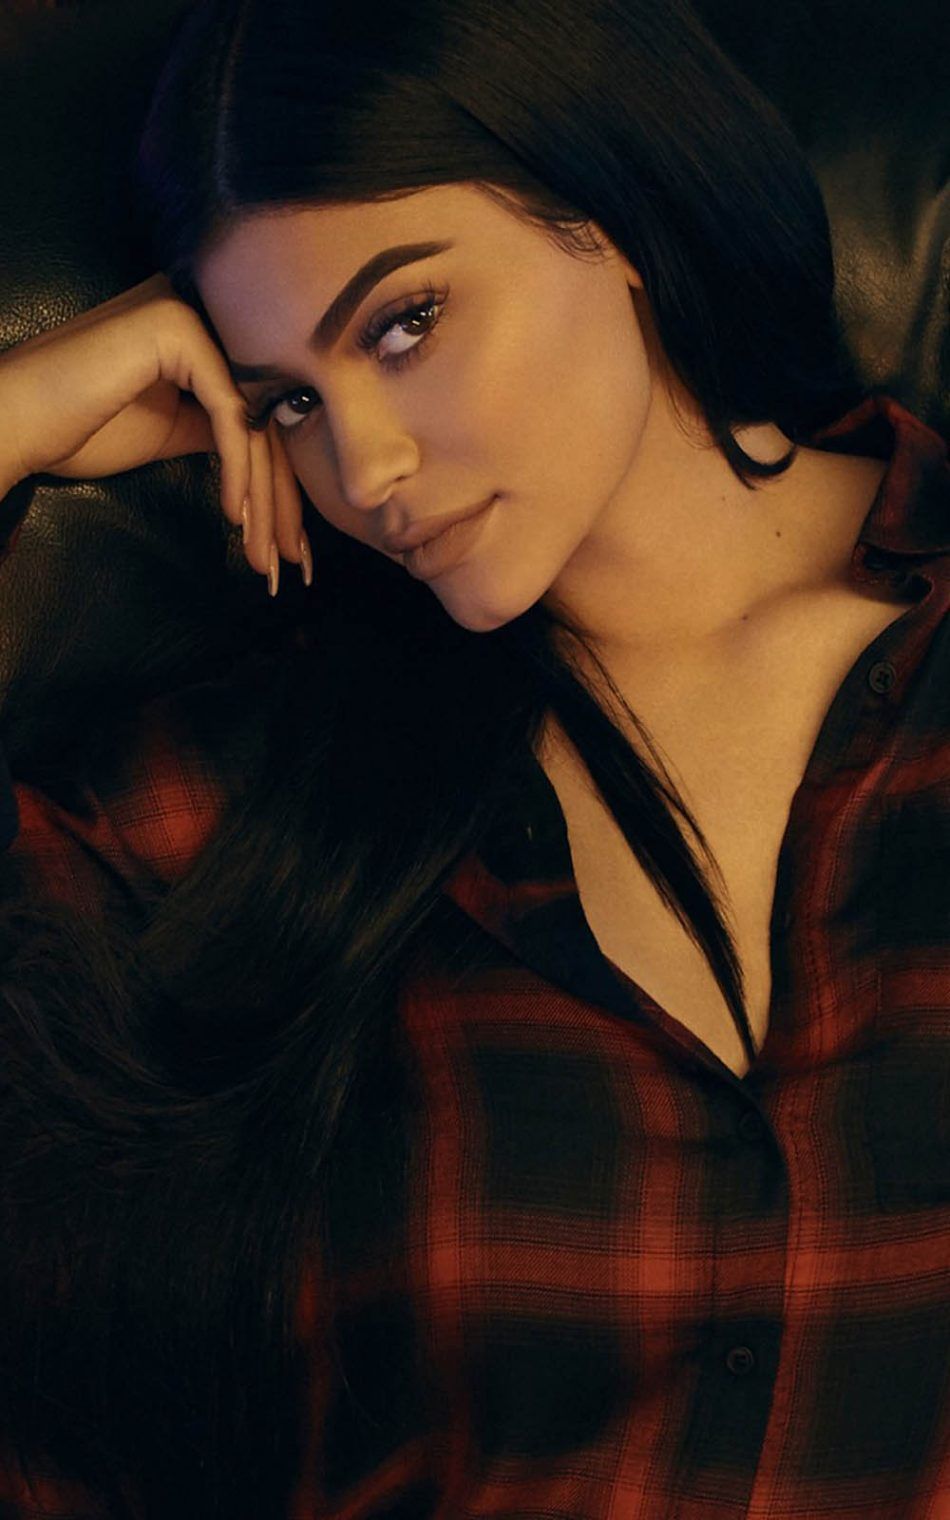 Kylie Jenner 2018 Wallpapers